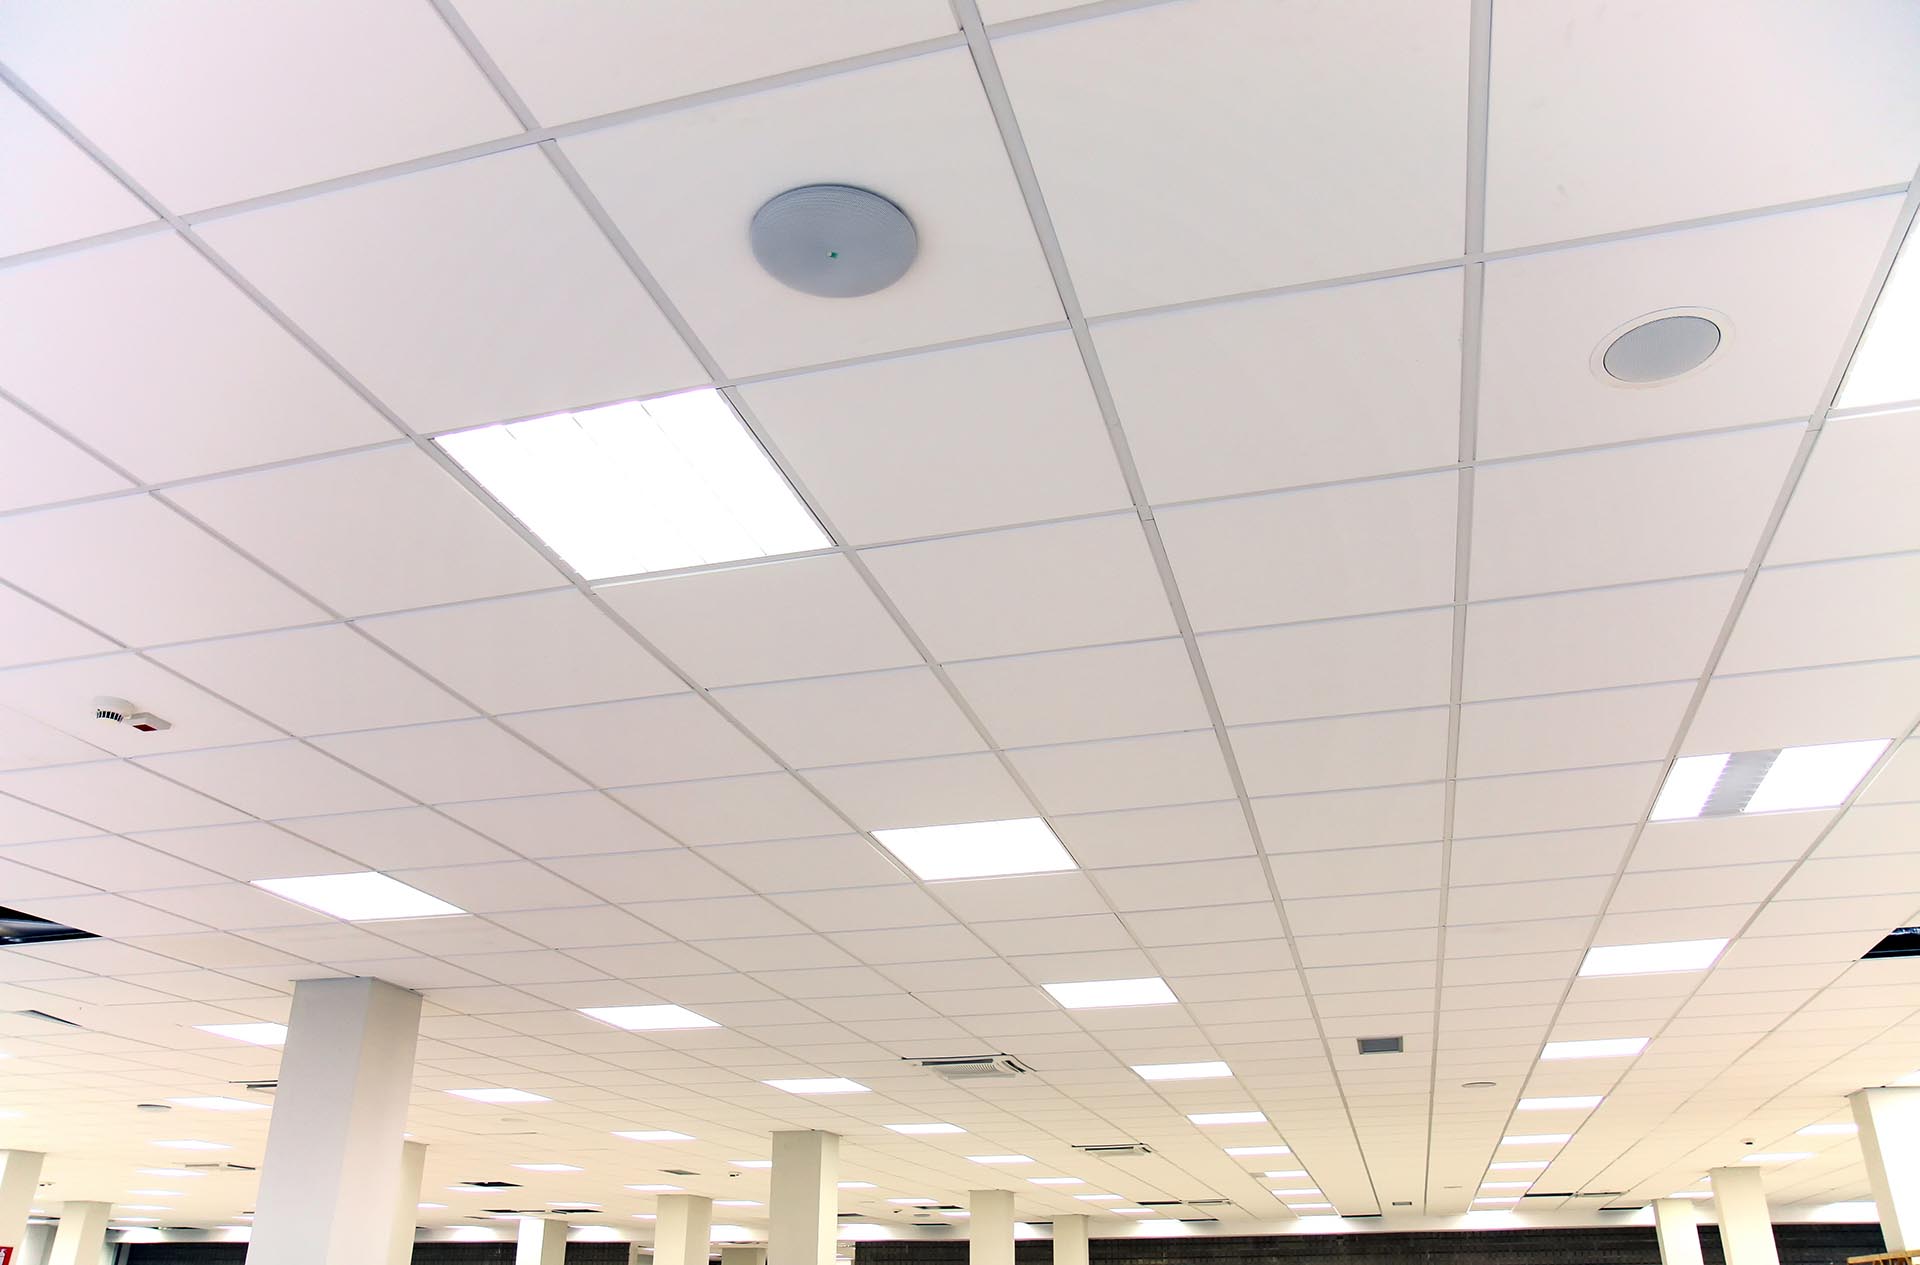 The ceiling of an office being sustainably lit with LED lighting